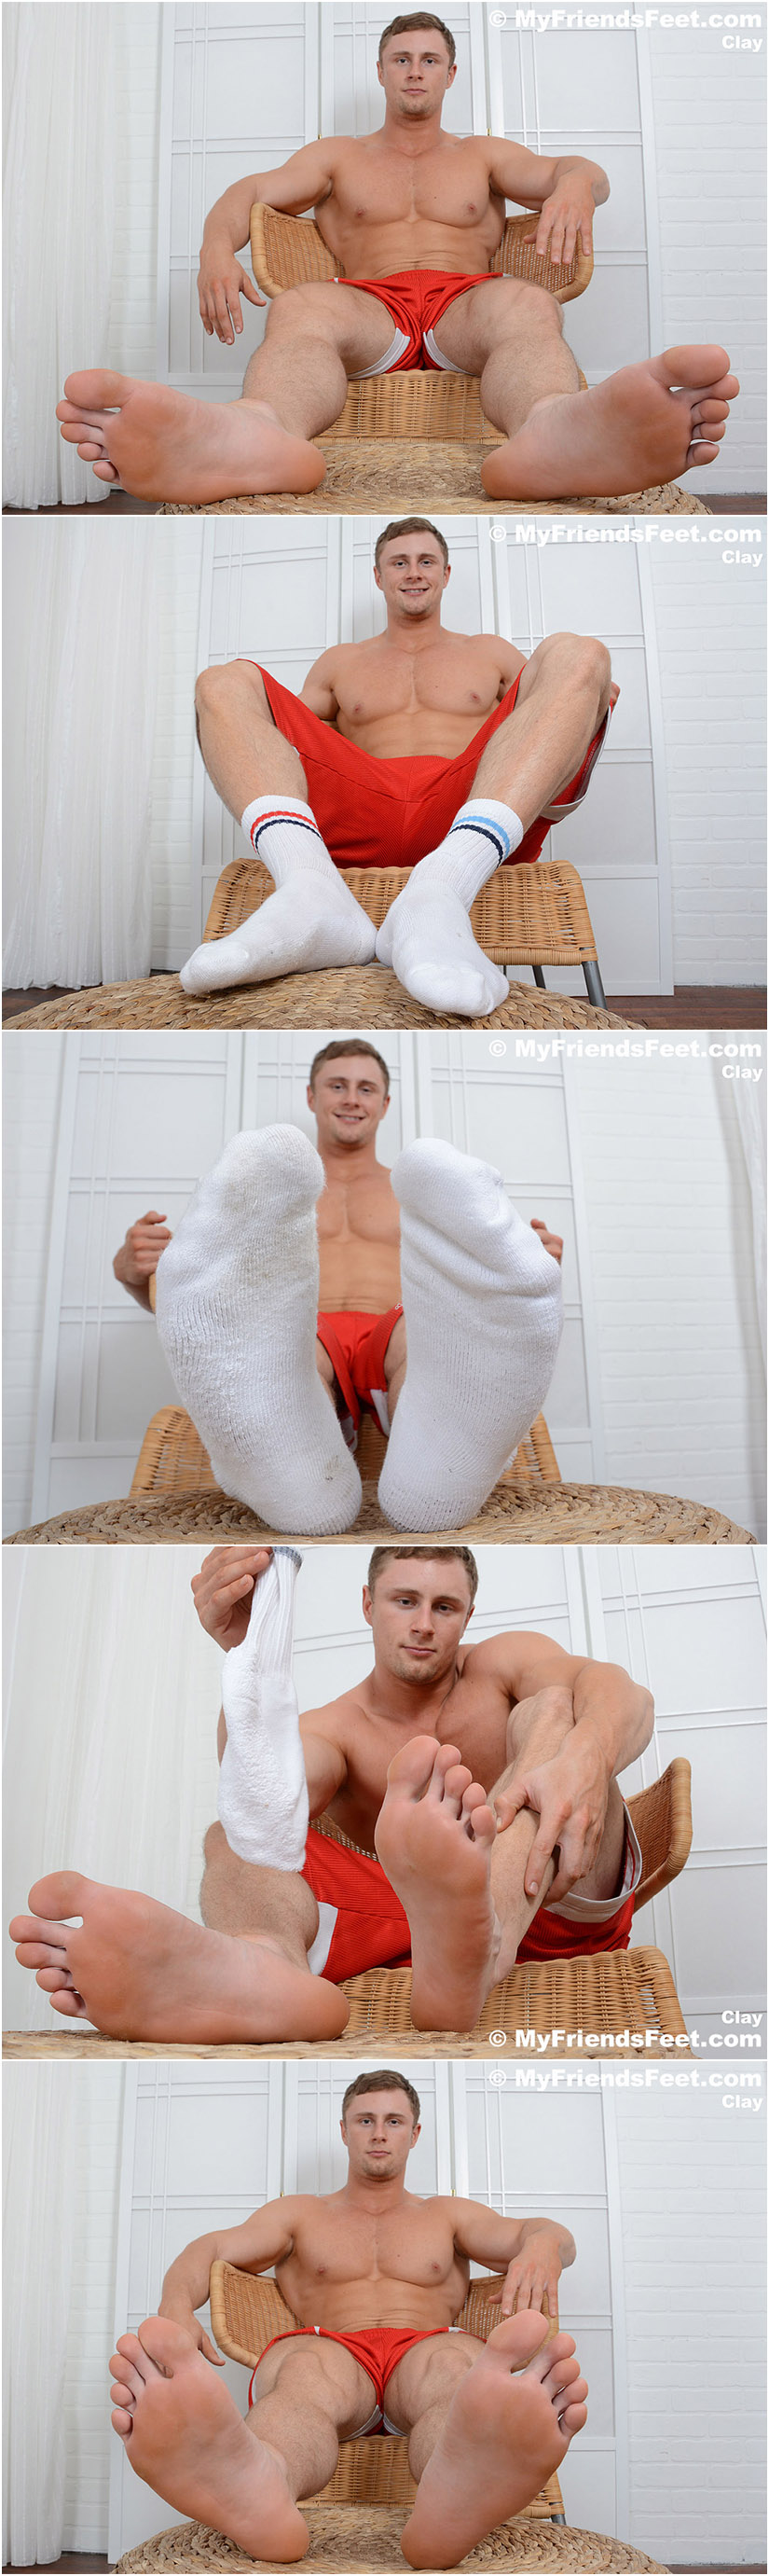 Muscle hunk takes off his socks and shows off his bare feet